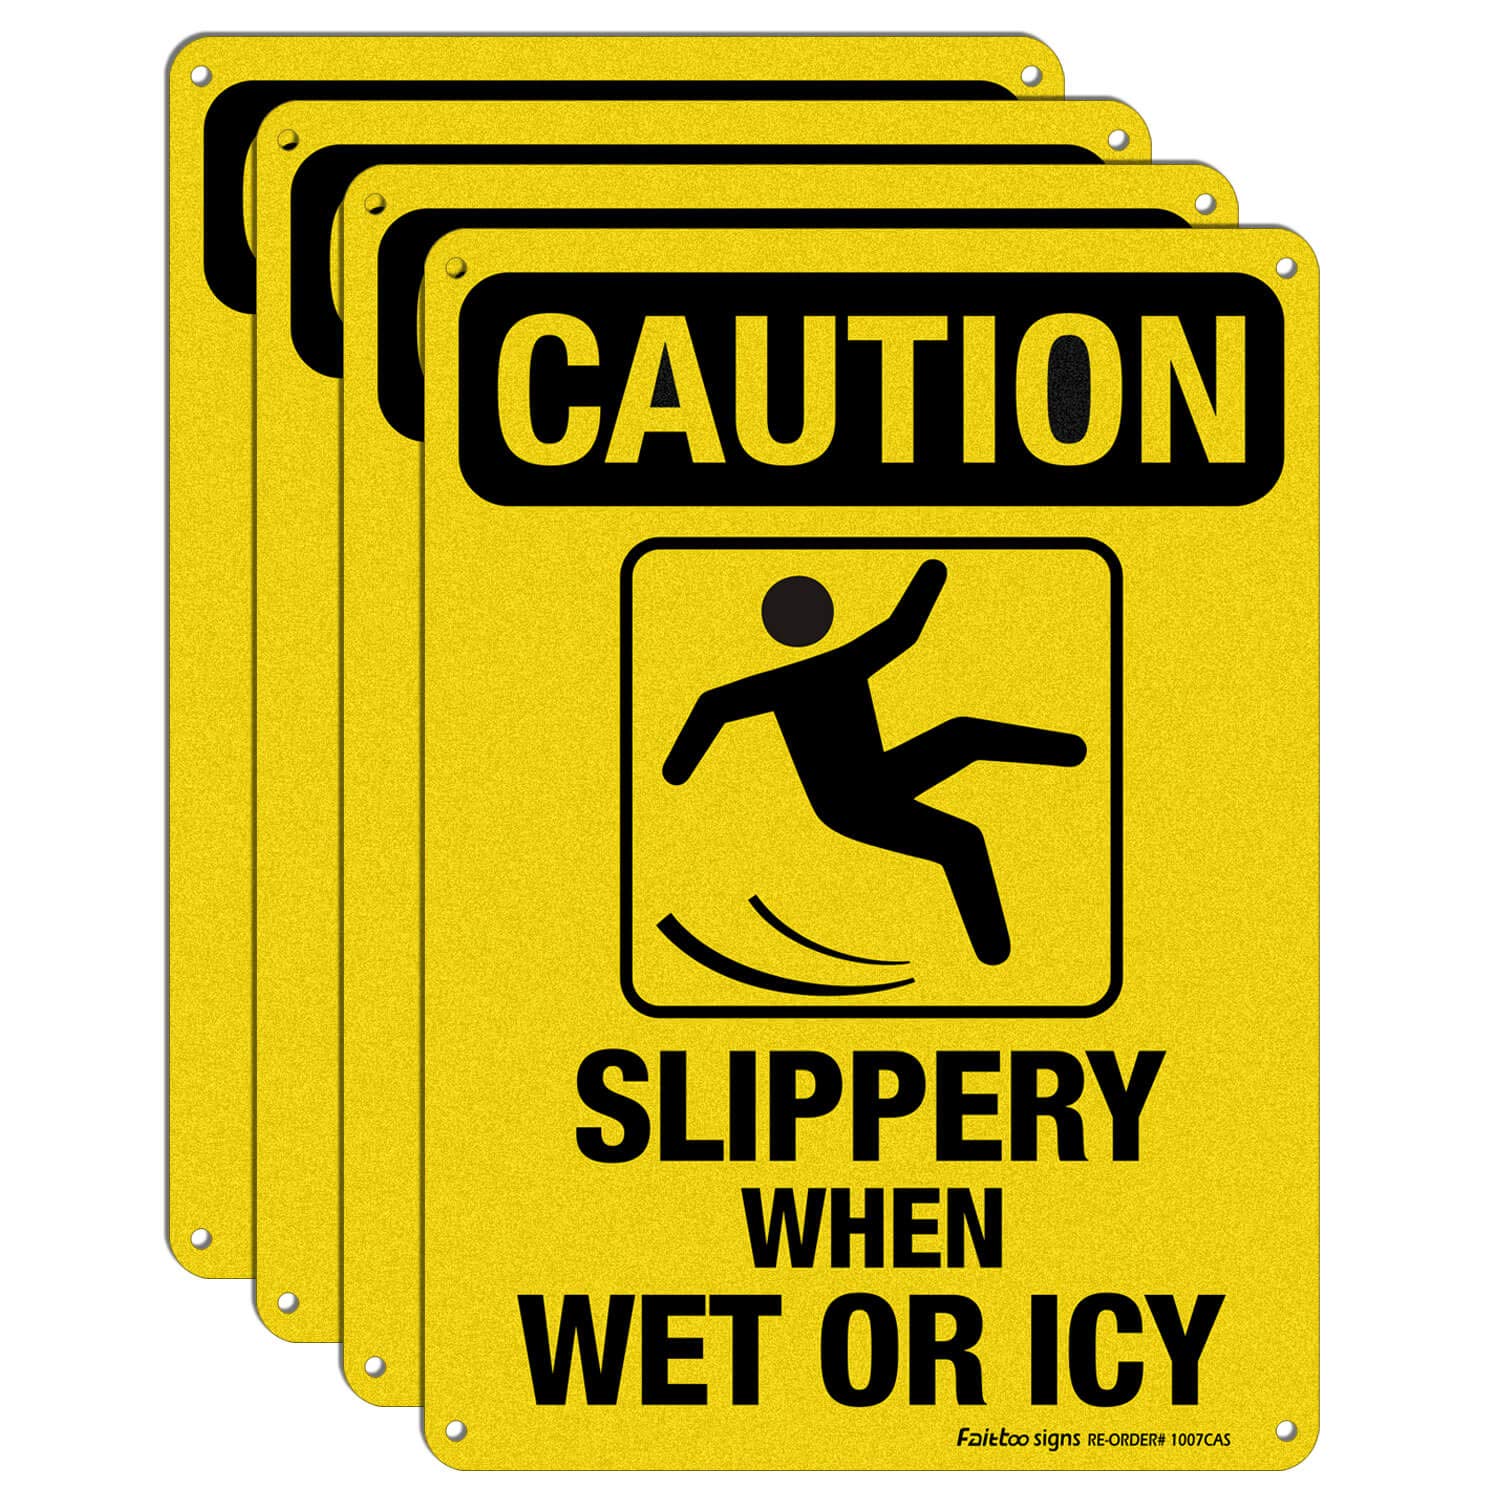 Caution Sign, Slippery When Wet or Icy Sign, (2 Pack) 10 x 7 Inches 0.40 Reflective Aluminum, UV Protected, Weather Resistant, Durable Ink, Easy to Mount